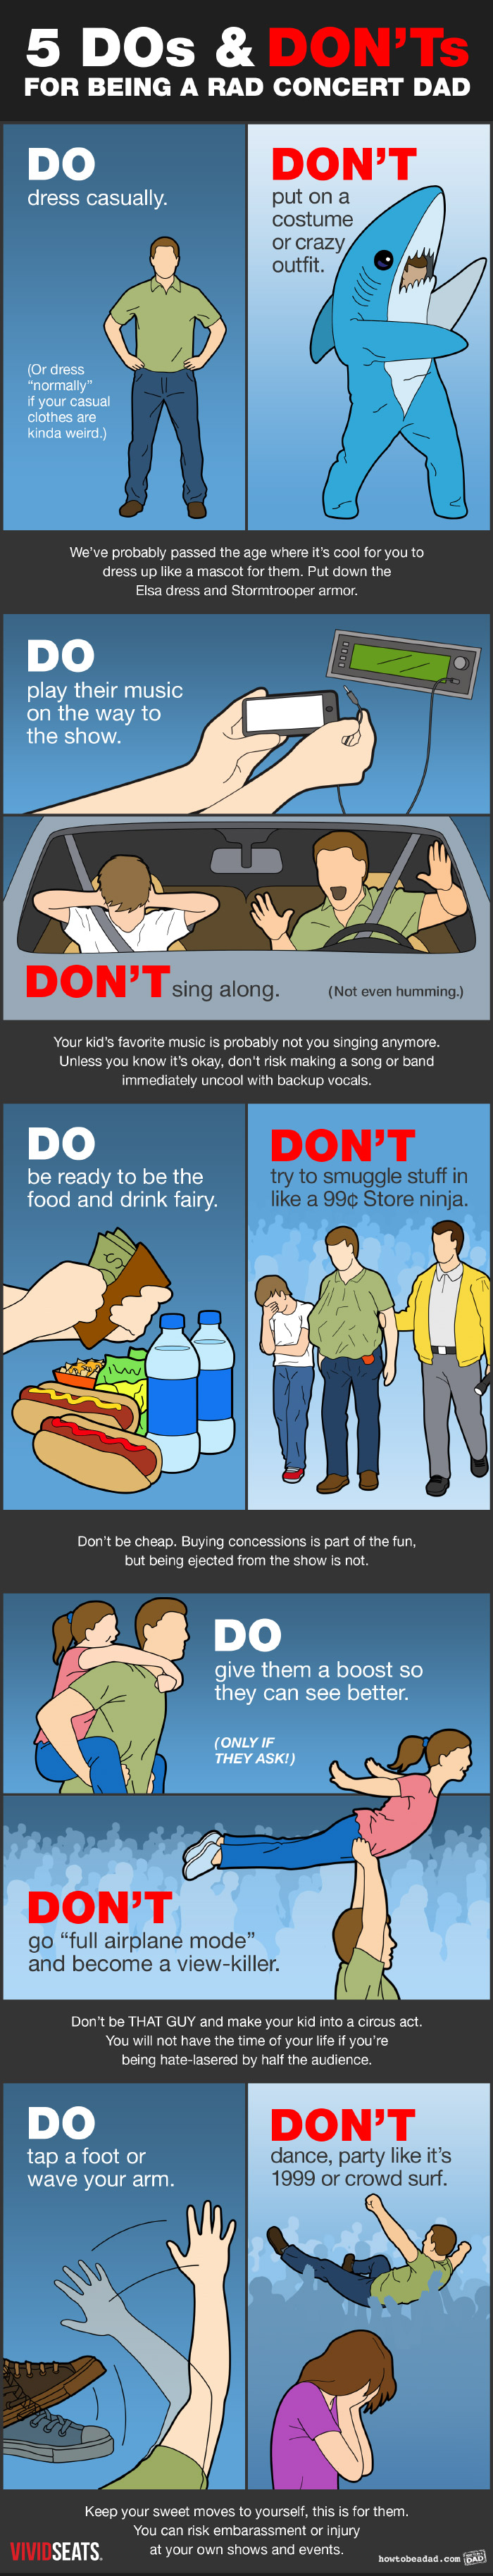 Dos and Don'ts for Being a Rad Concert Dad Funny Tips and Warnings